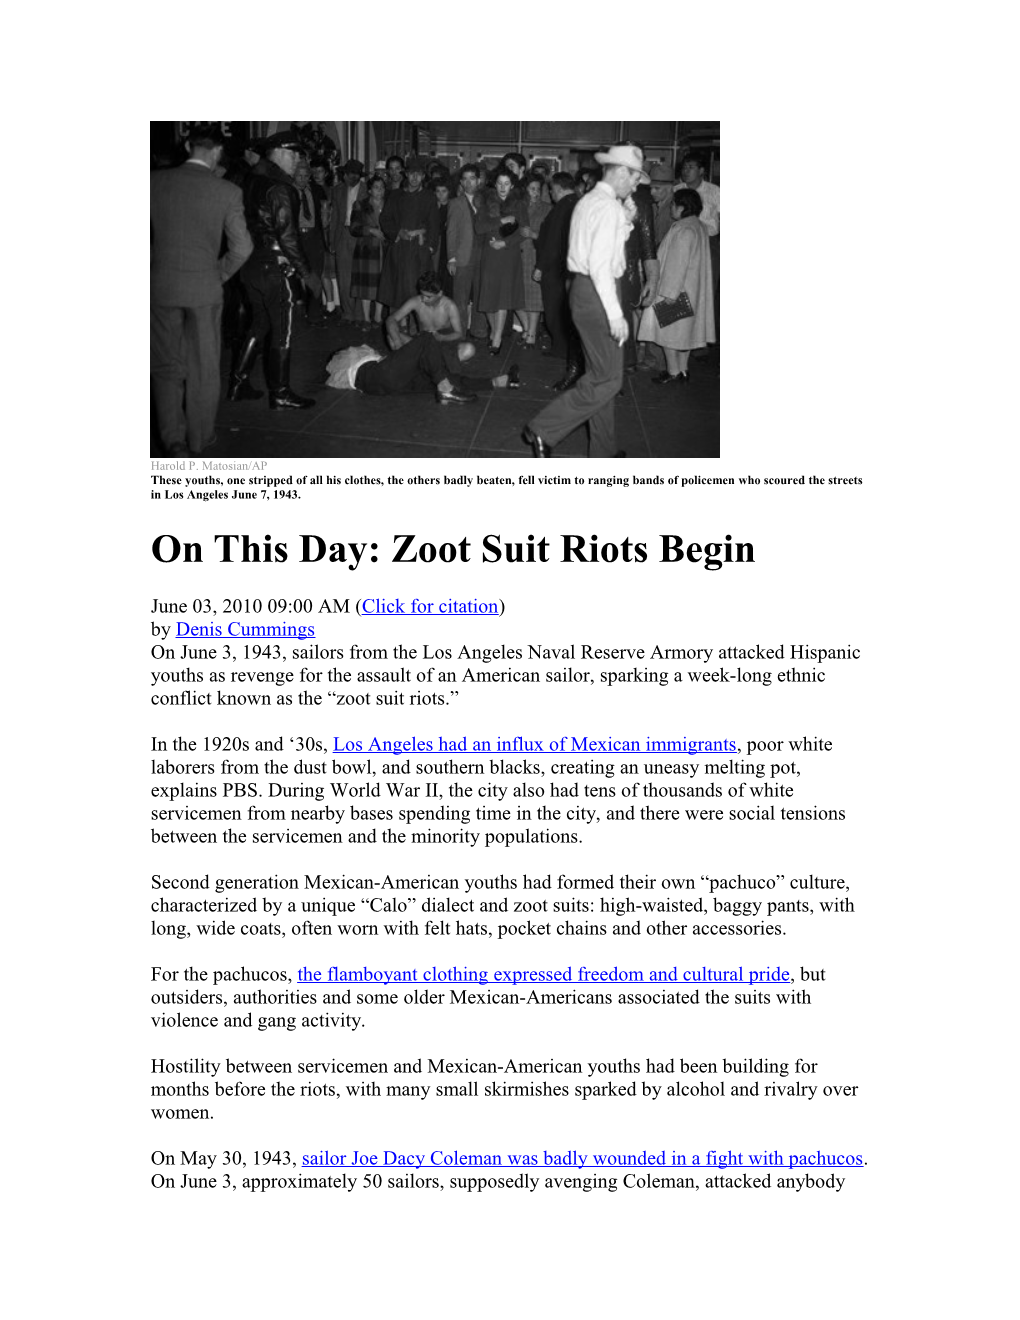 On This Day: Zoot Suit Riots Begin